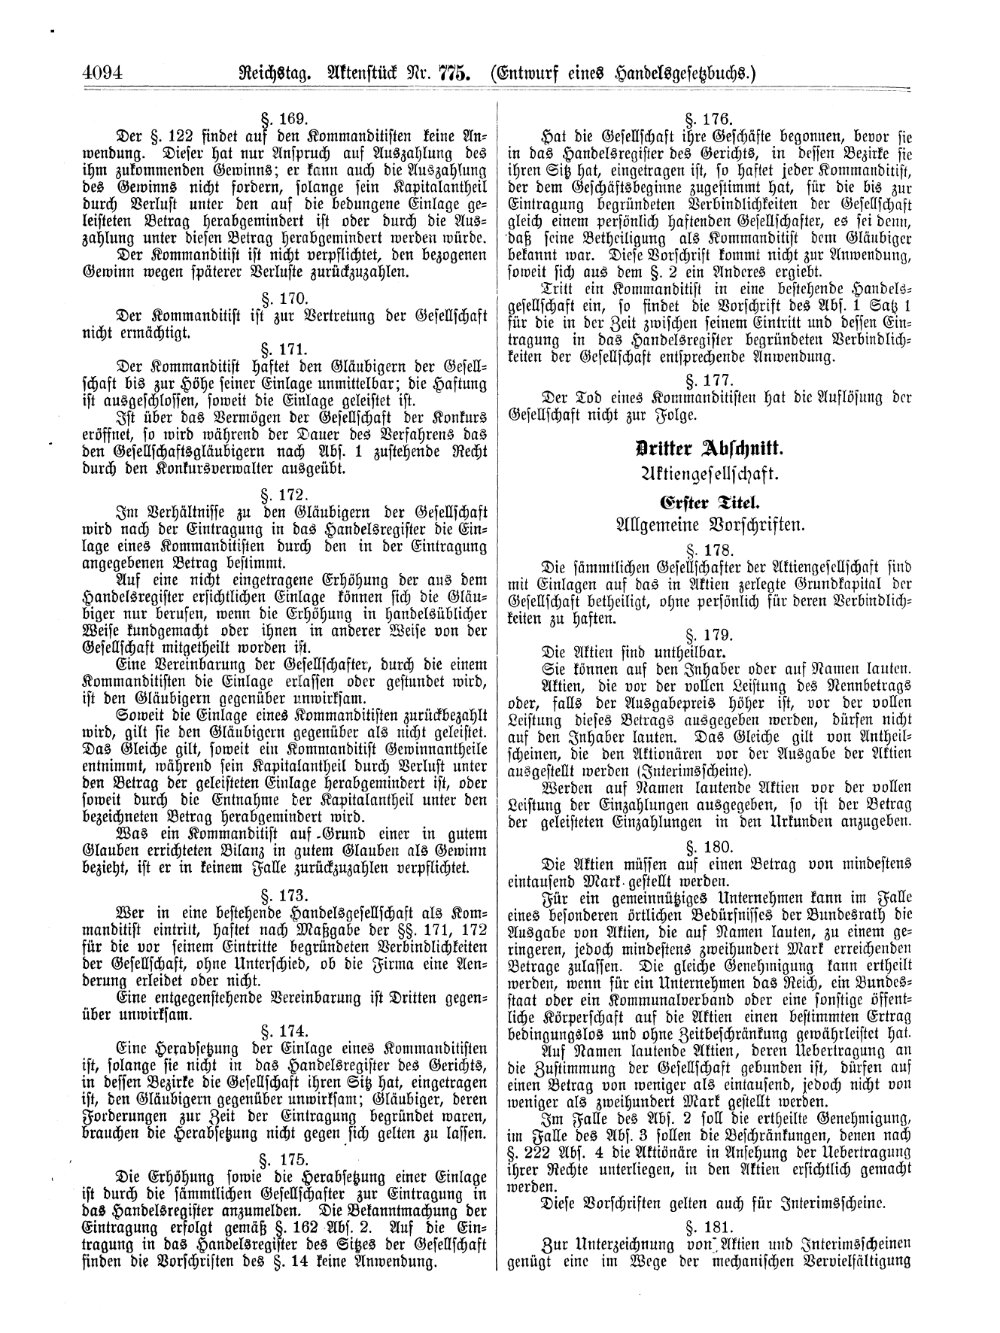 Scan of page 4094